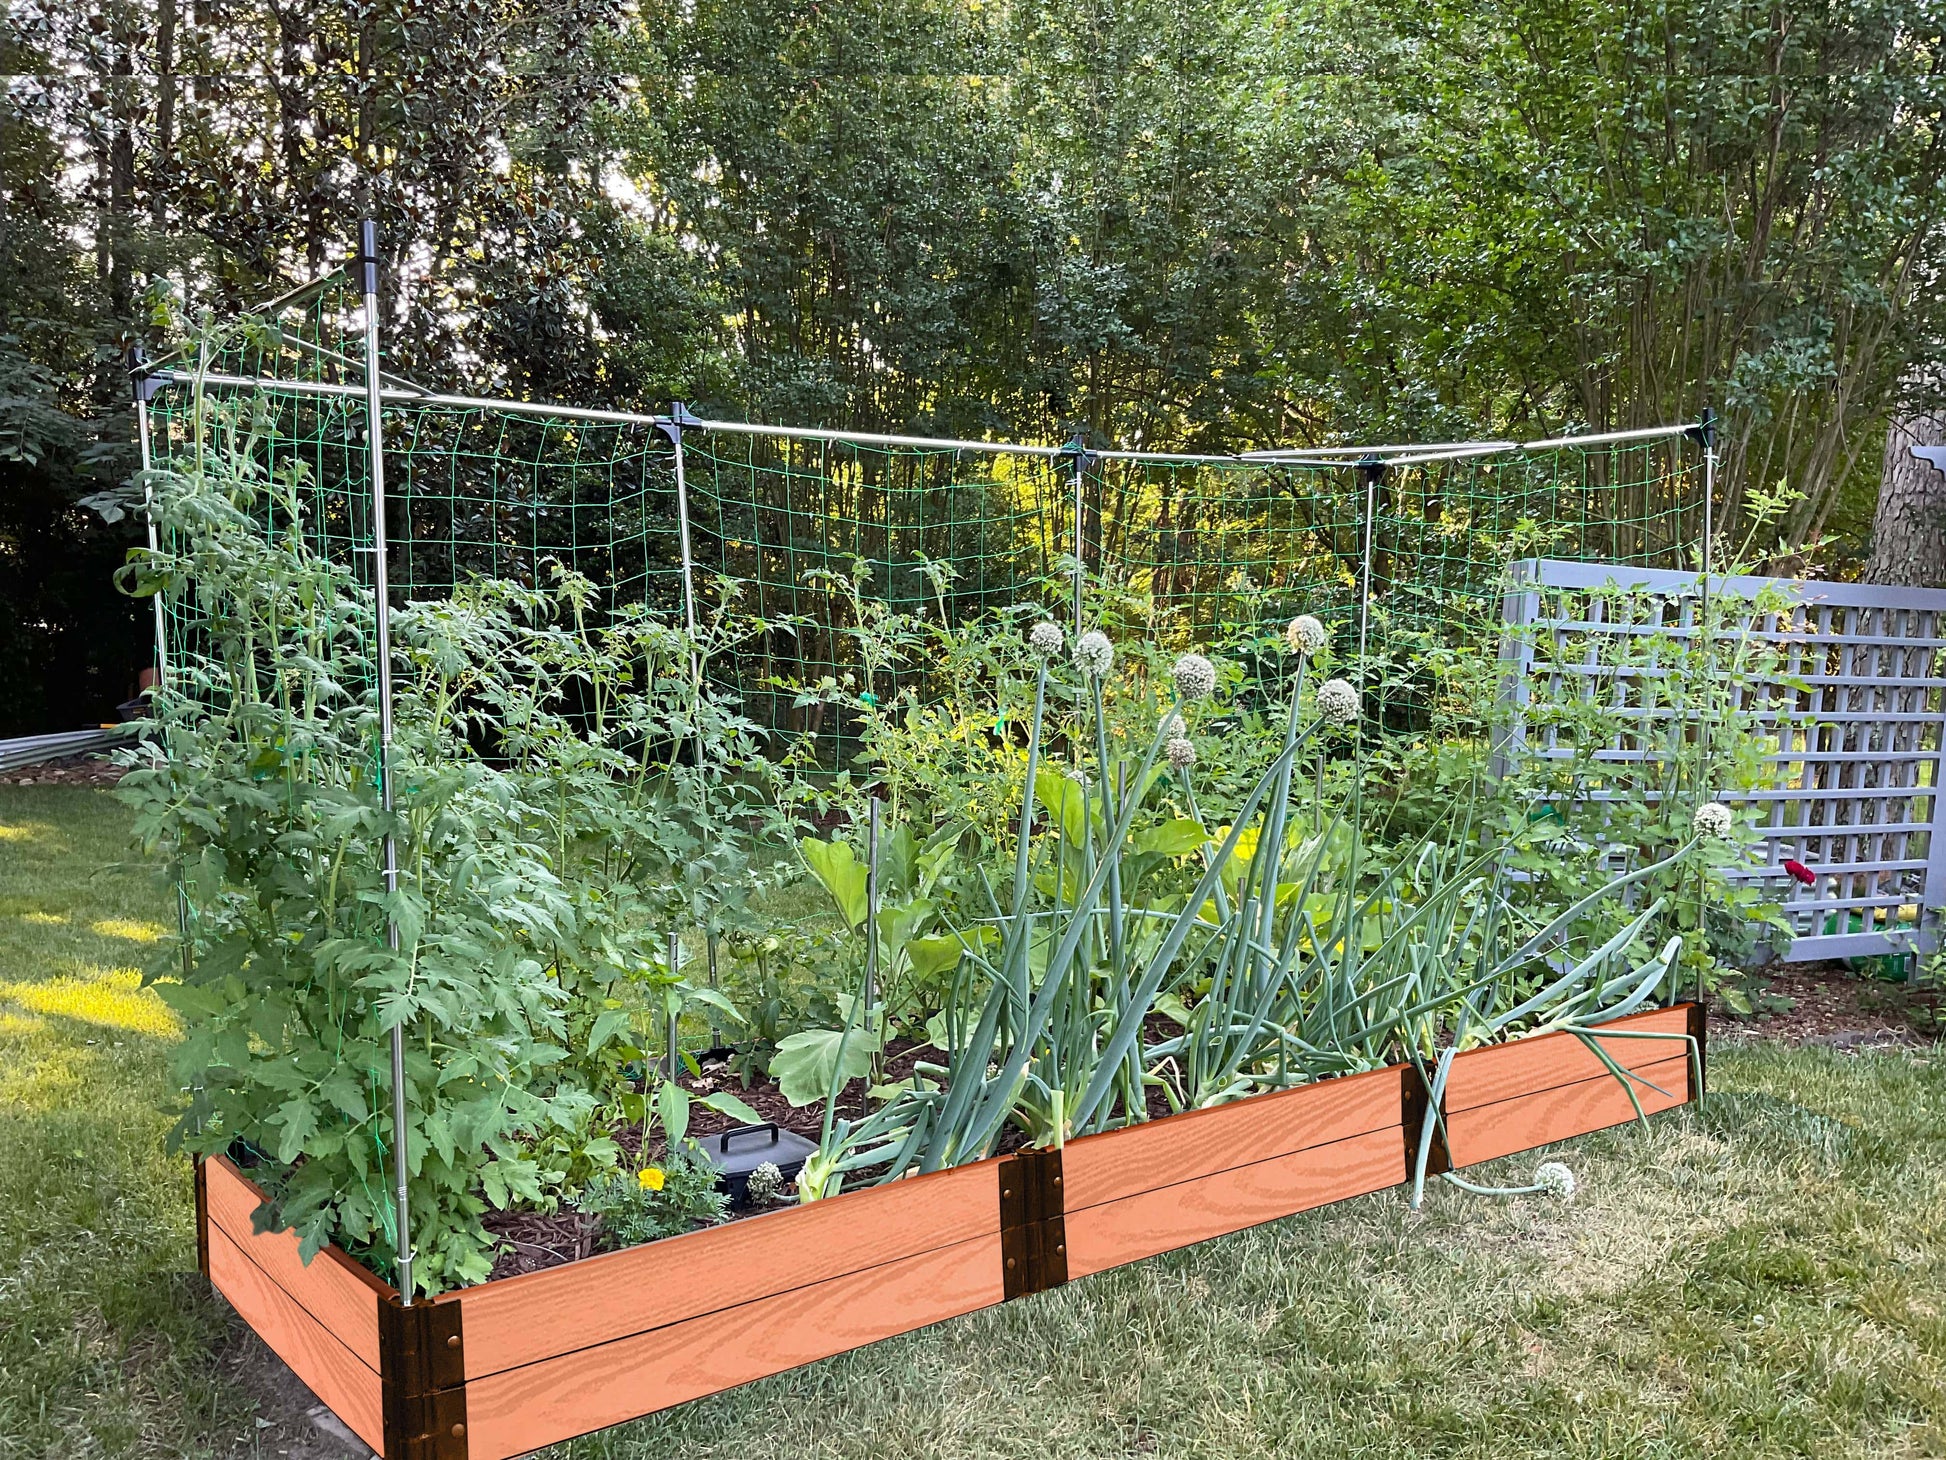 4' x 12' Raised Garden Bed with Trellis – Frame It All